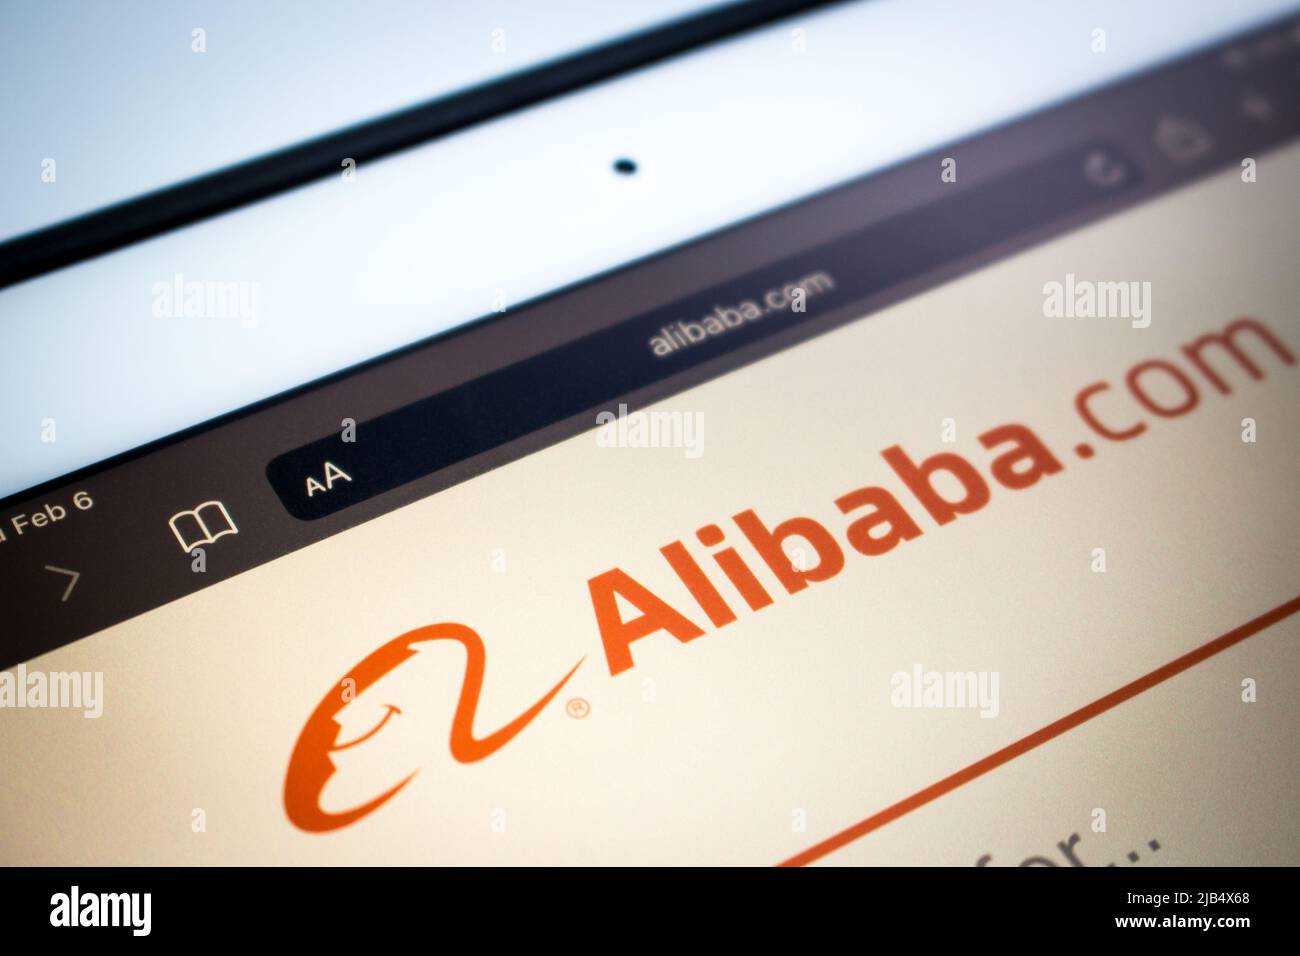 Alibaba logo on its website on tablet. Alibaba Group, Chinese multinational conglomerate holding, is the largest retailer and e-commerce company Stock Photo